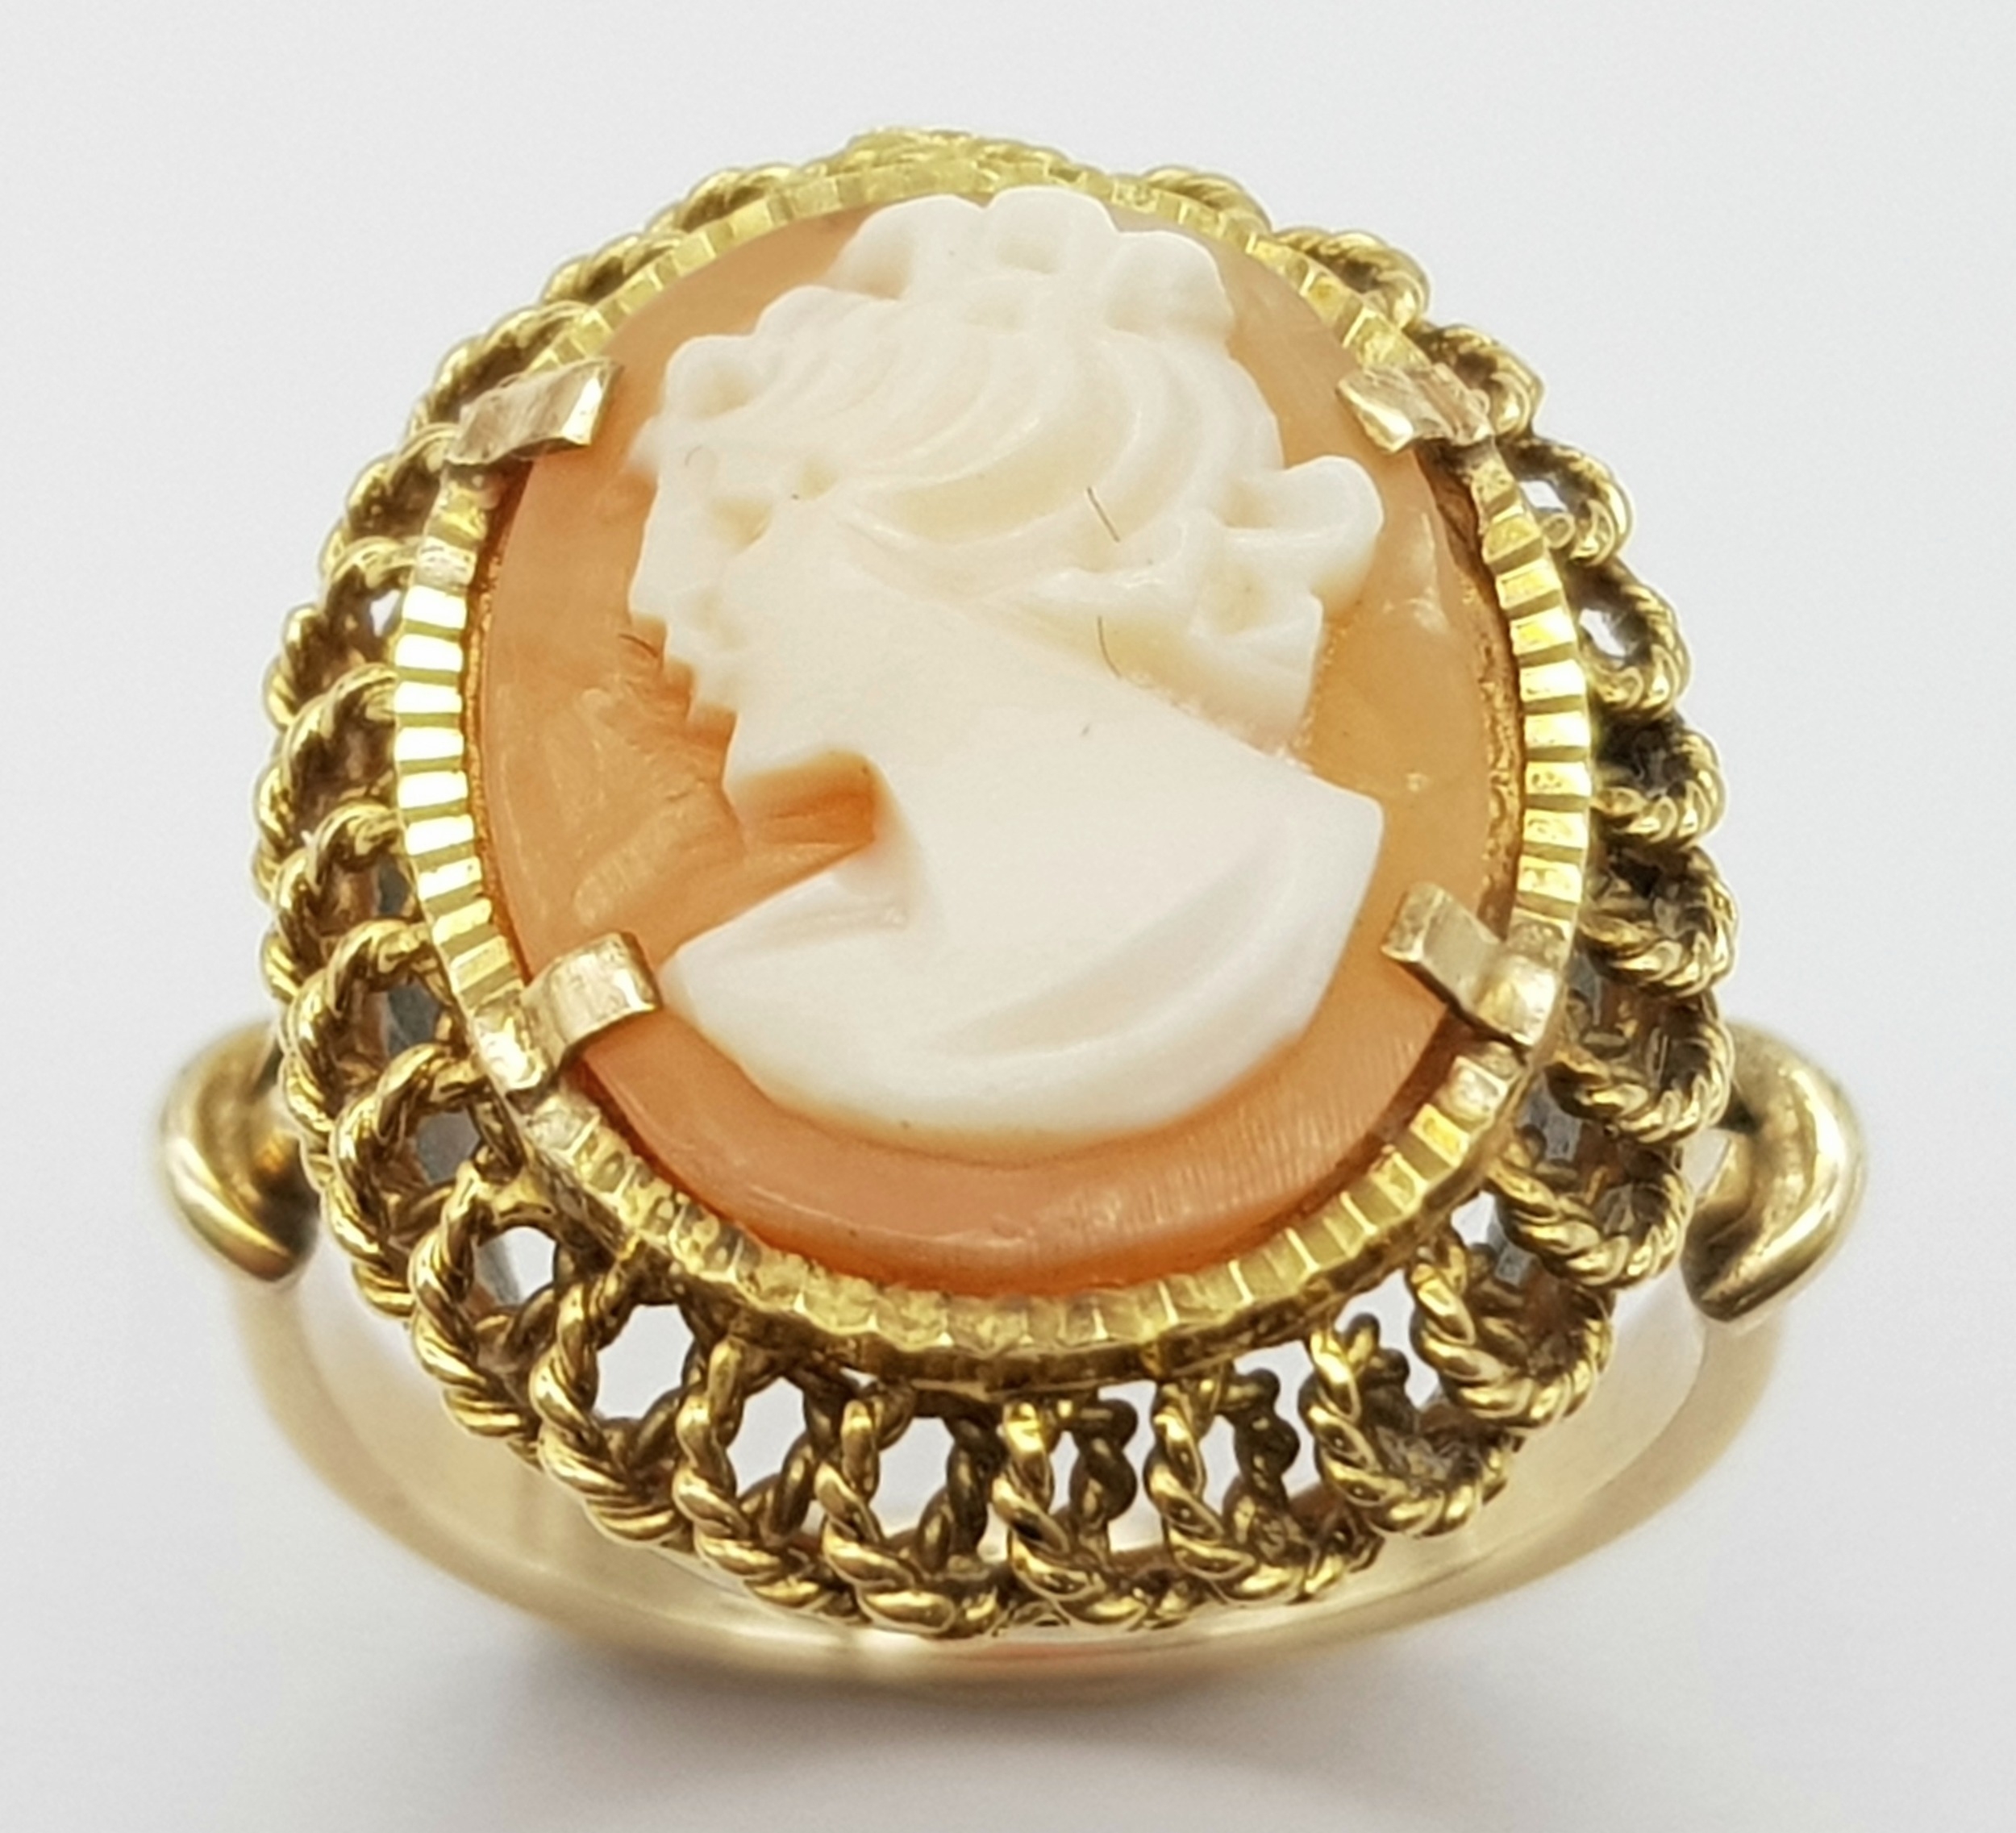 A Vintage 9K Yellow Gold Cameo Ring. Size P. 6.1g total weight. - Image 2 of 5